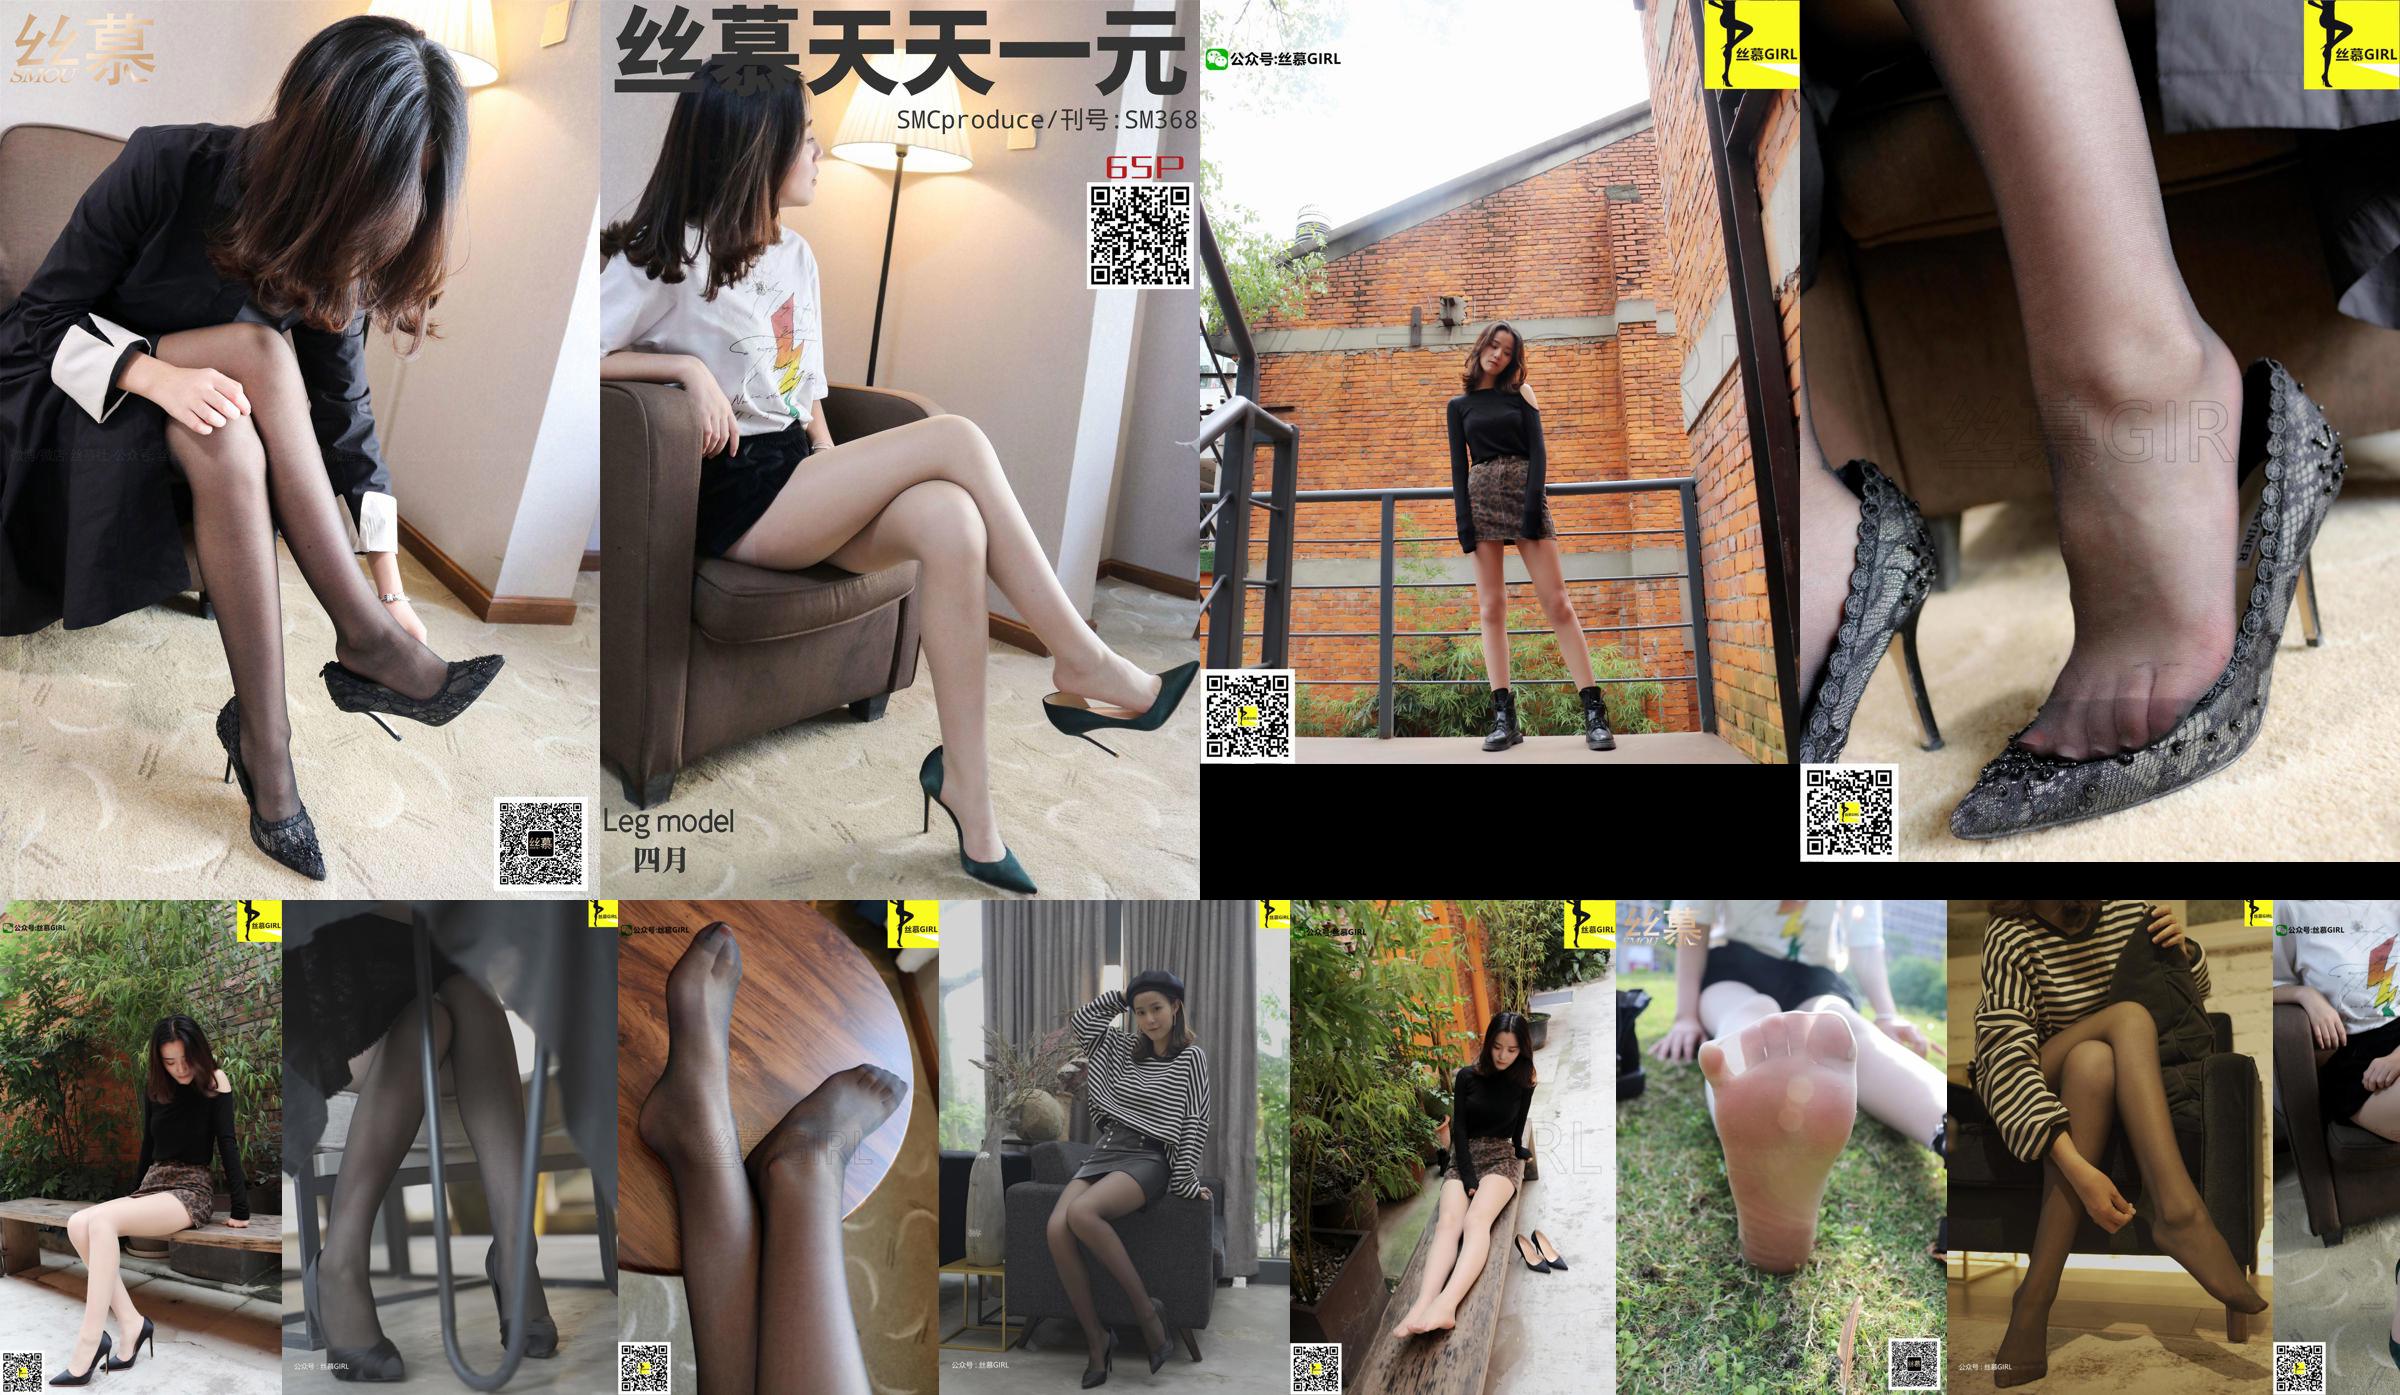 [Simu] SM368 Every Day One Yuan April "Double Silk Review" No.c3c630 Page 1